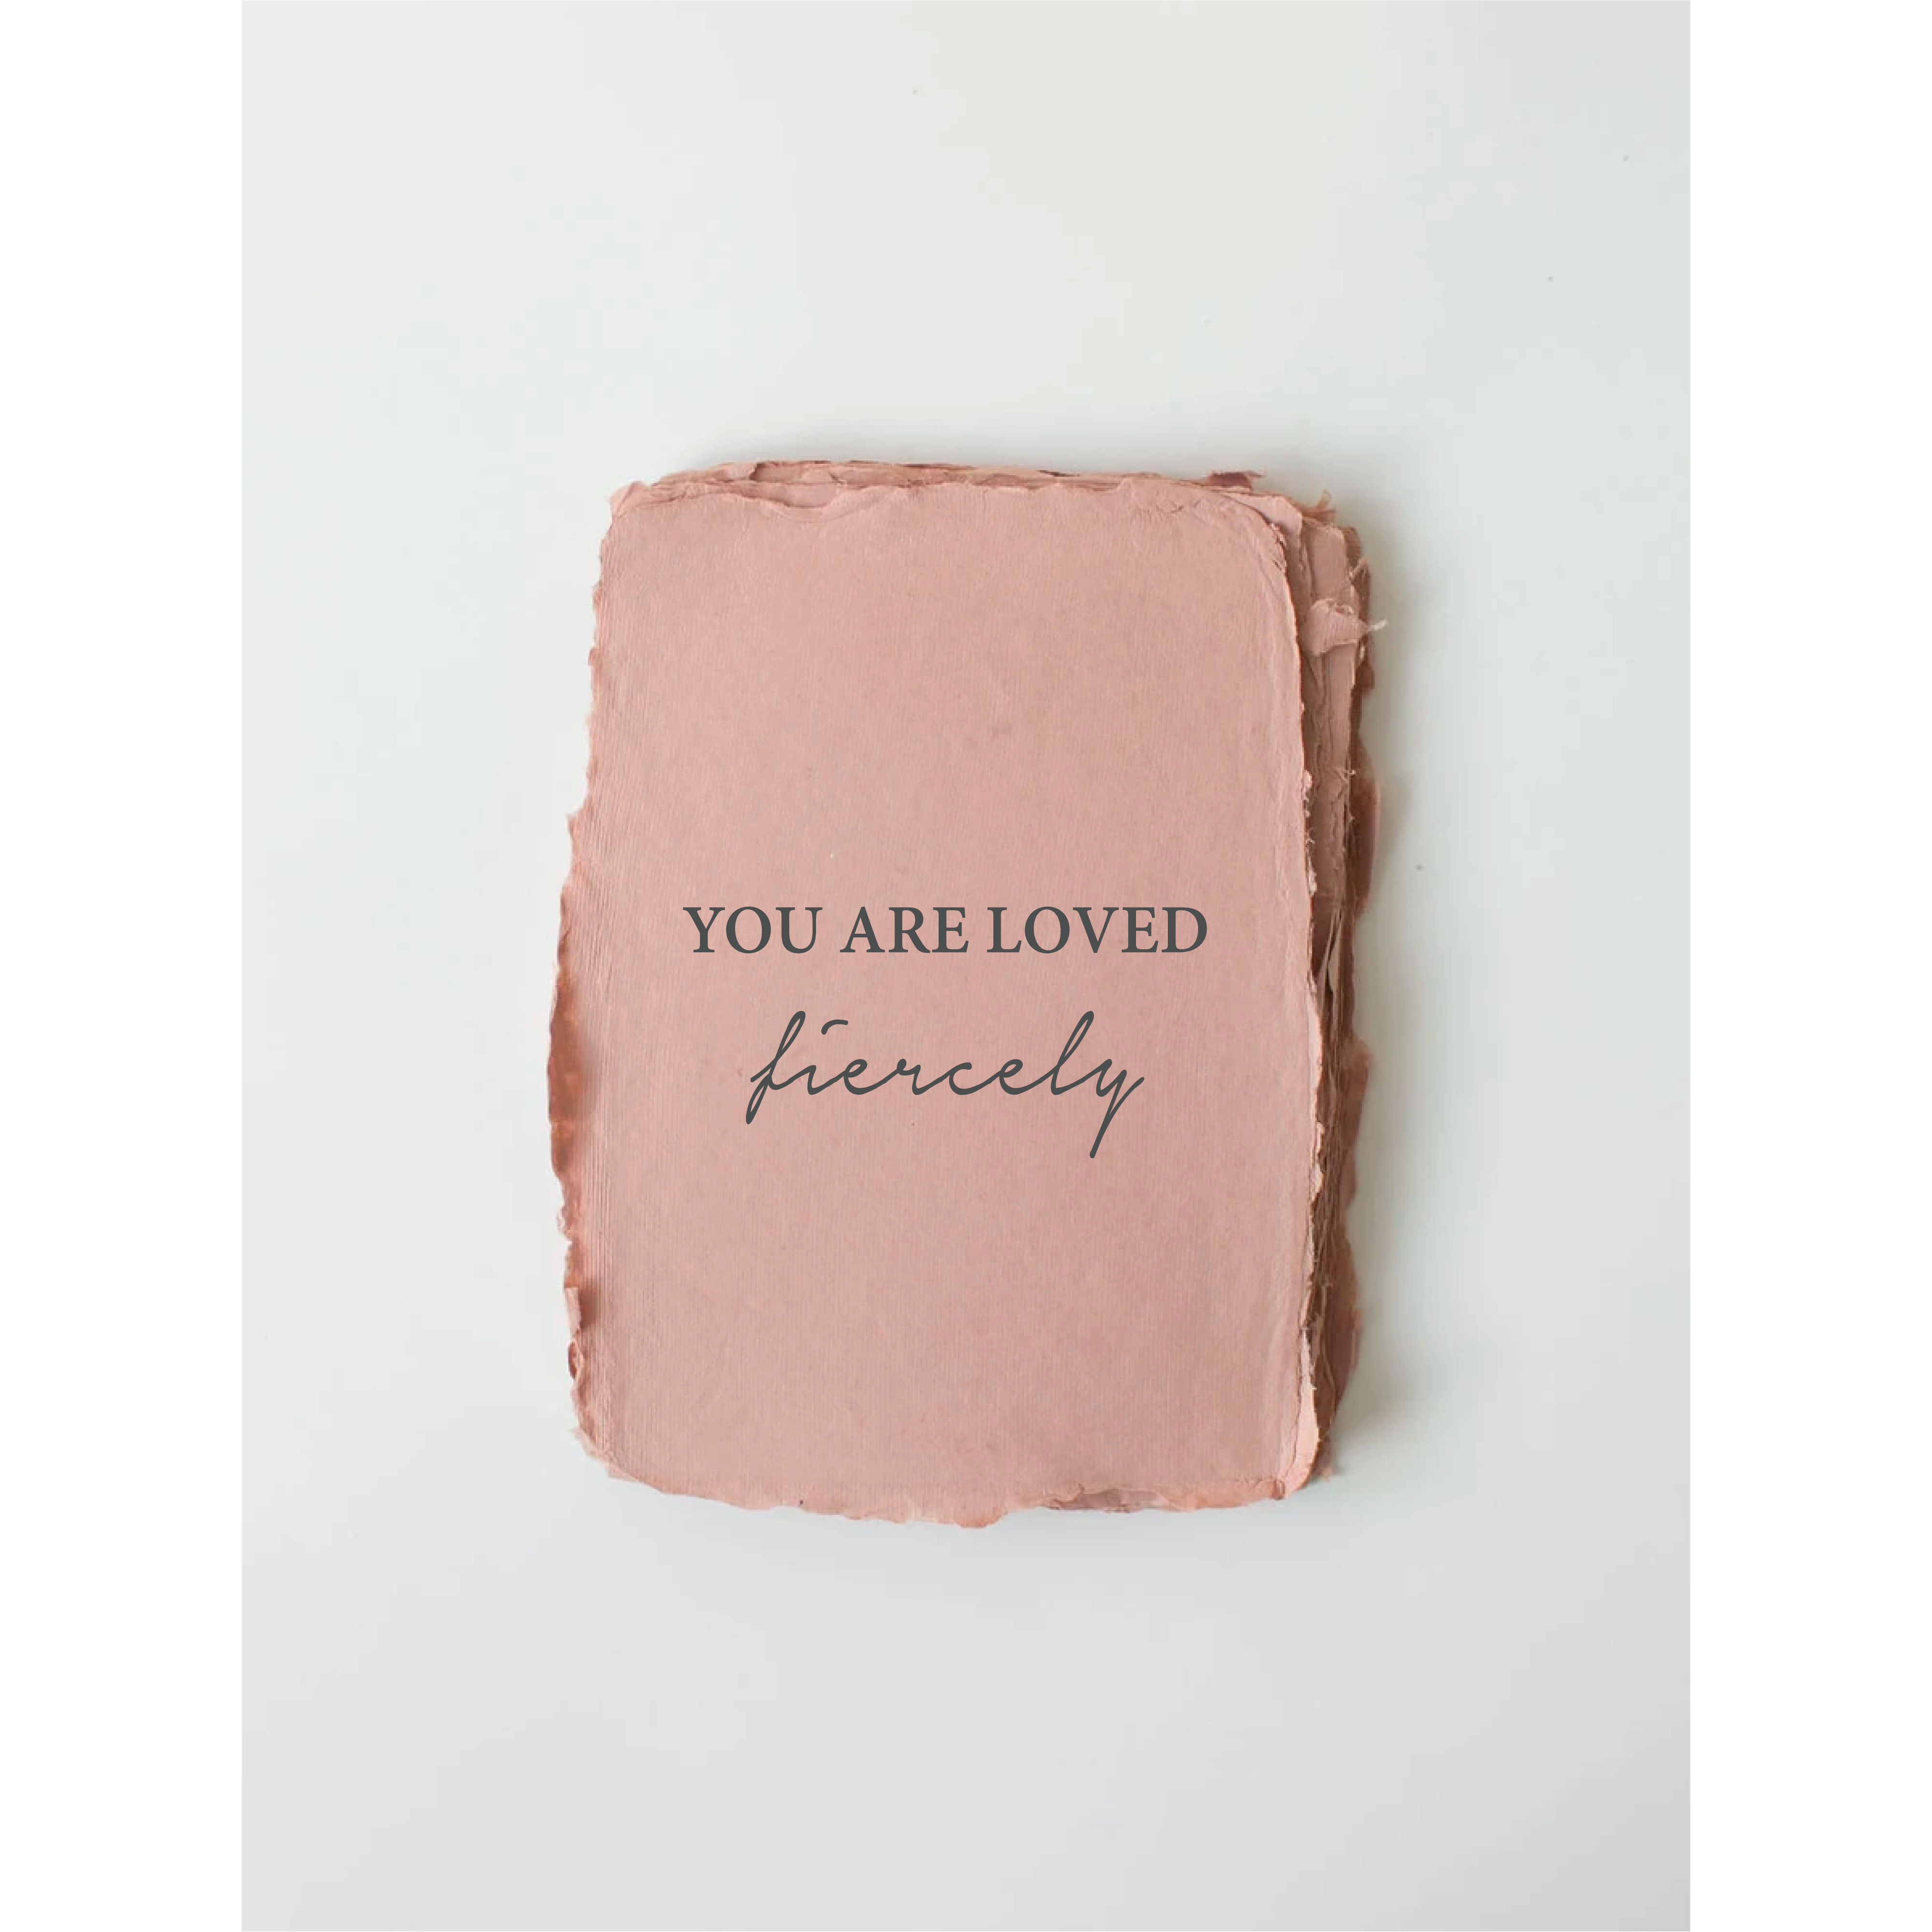 "You Are Loved, Fiercely" Love/Friendship Card